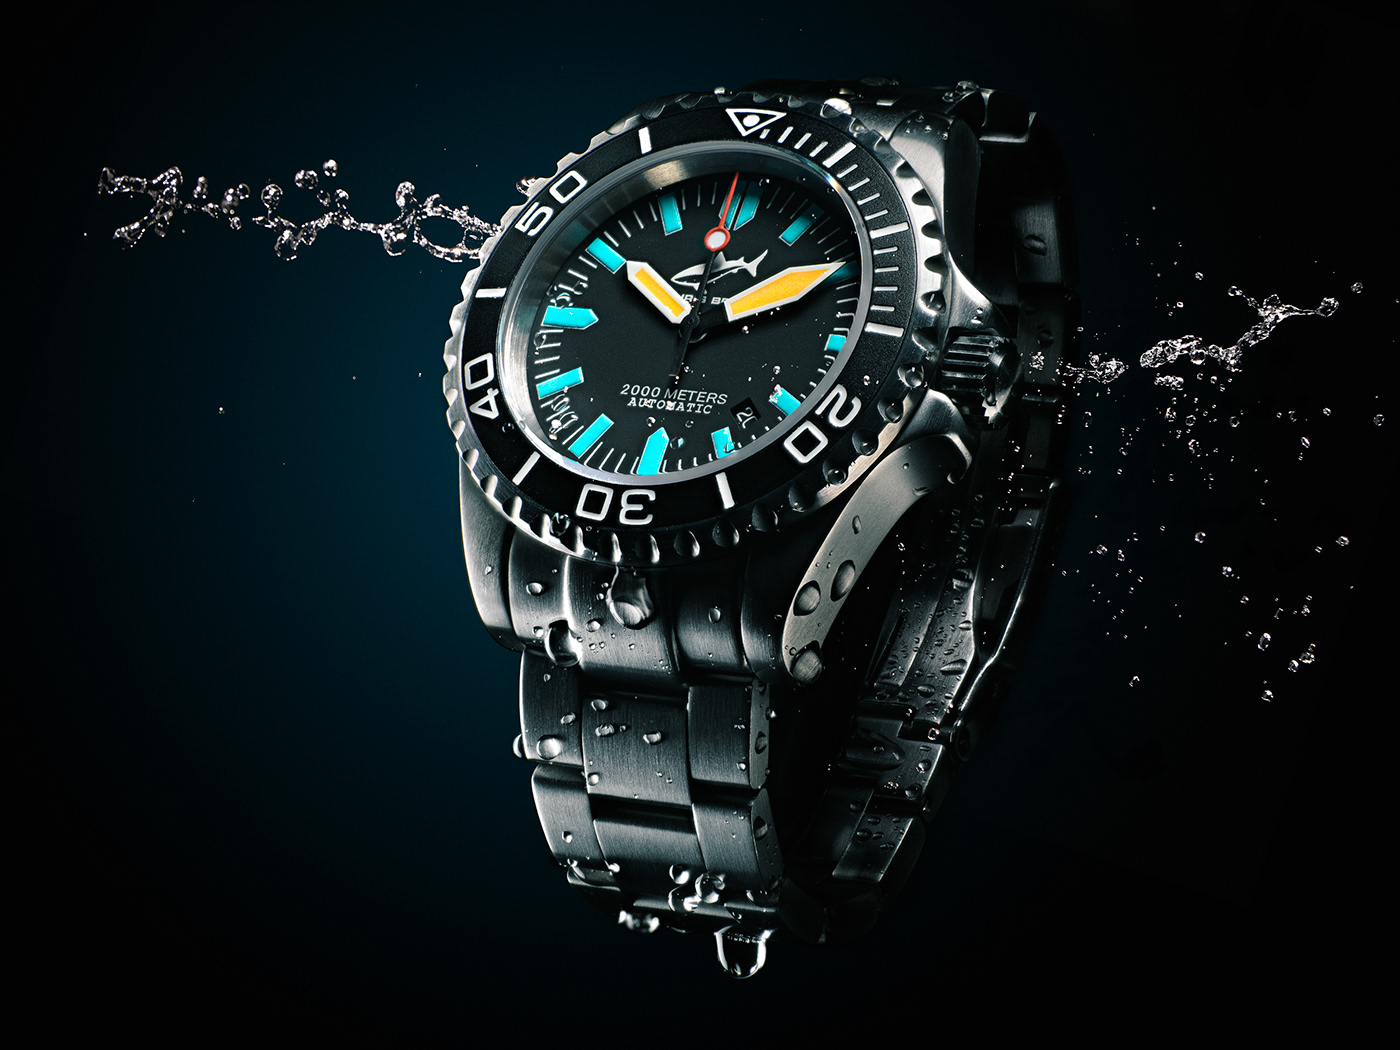 Chris benz watch underwater digitalmovie matteomescalchin lighting sport Advertising  Commercial Photography Commercial Diving